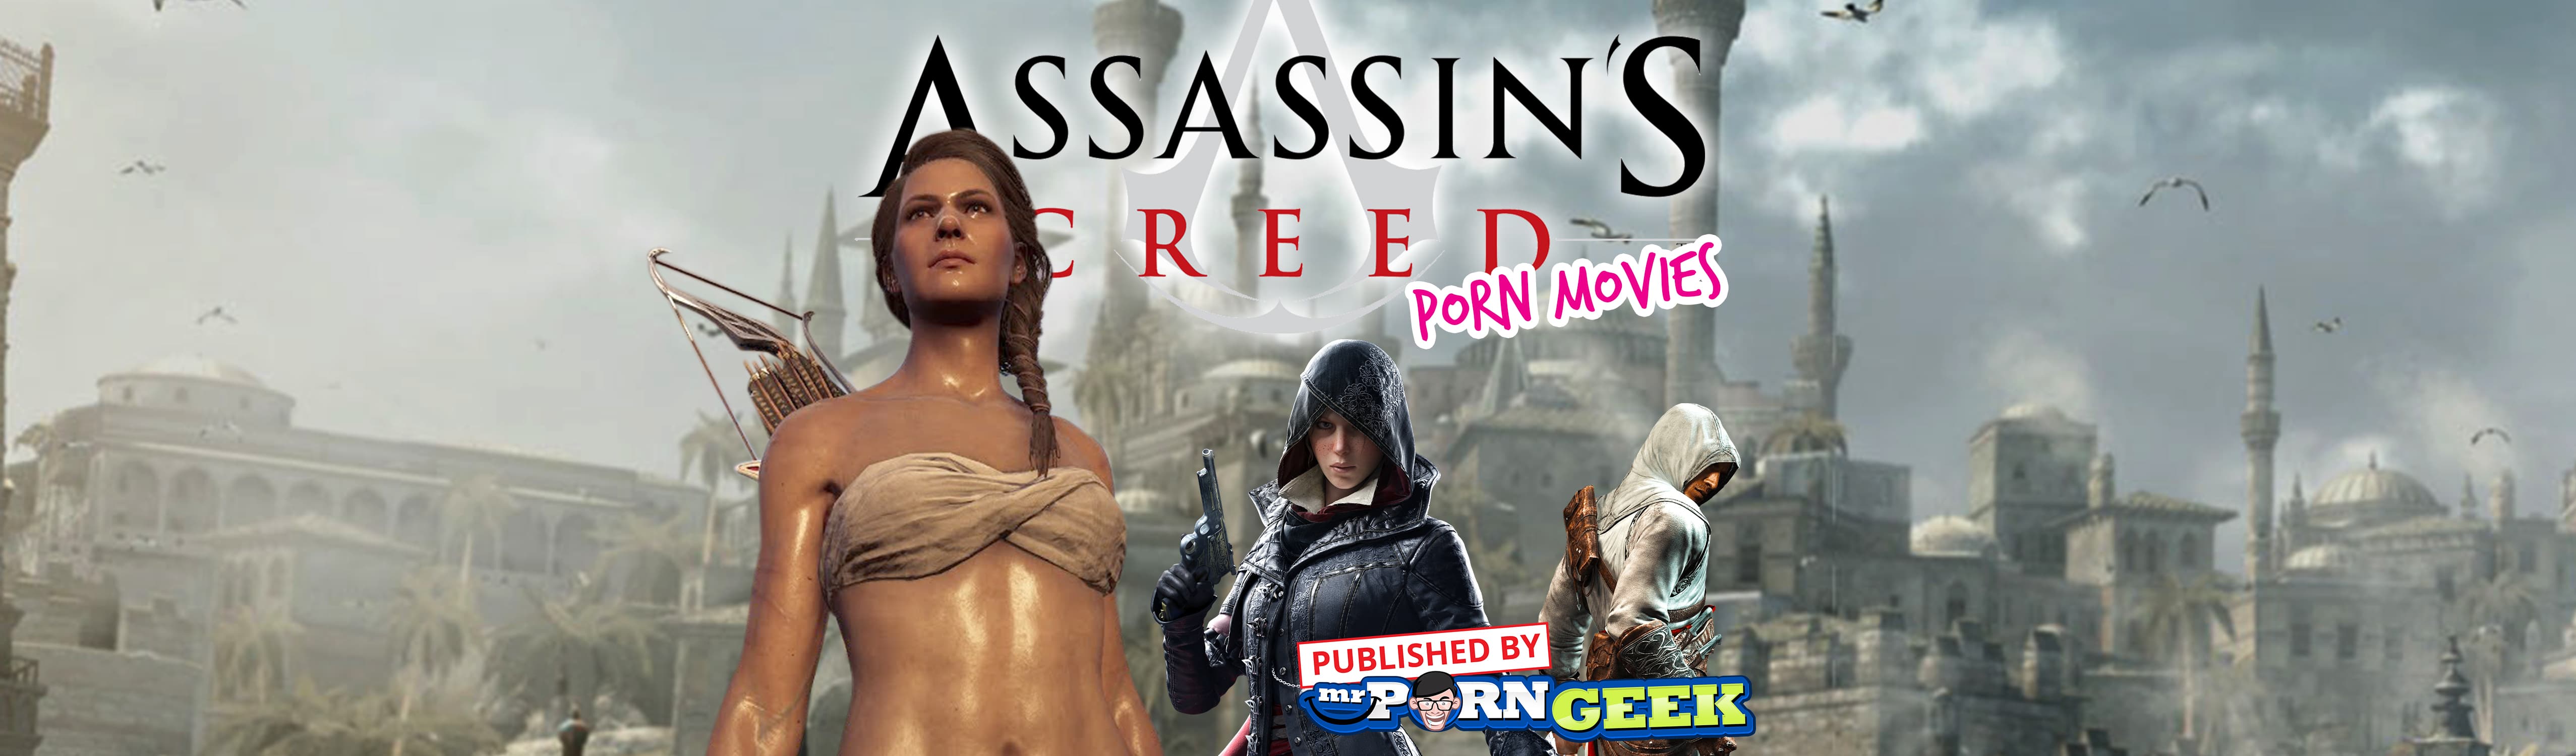 best of Creed review games assassins